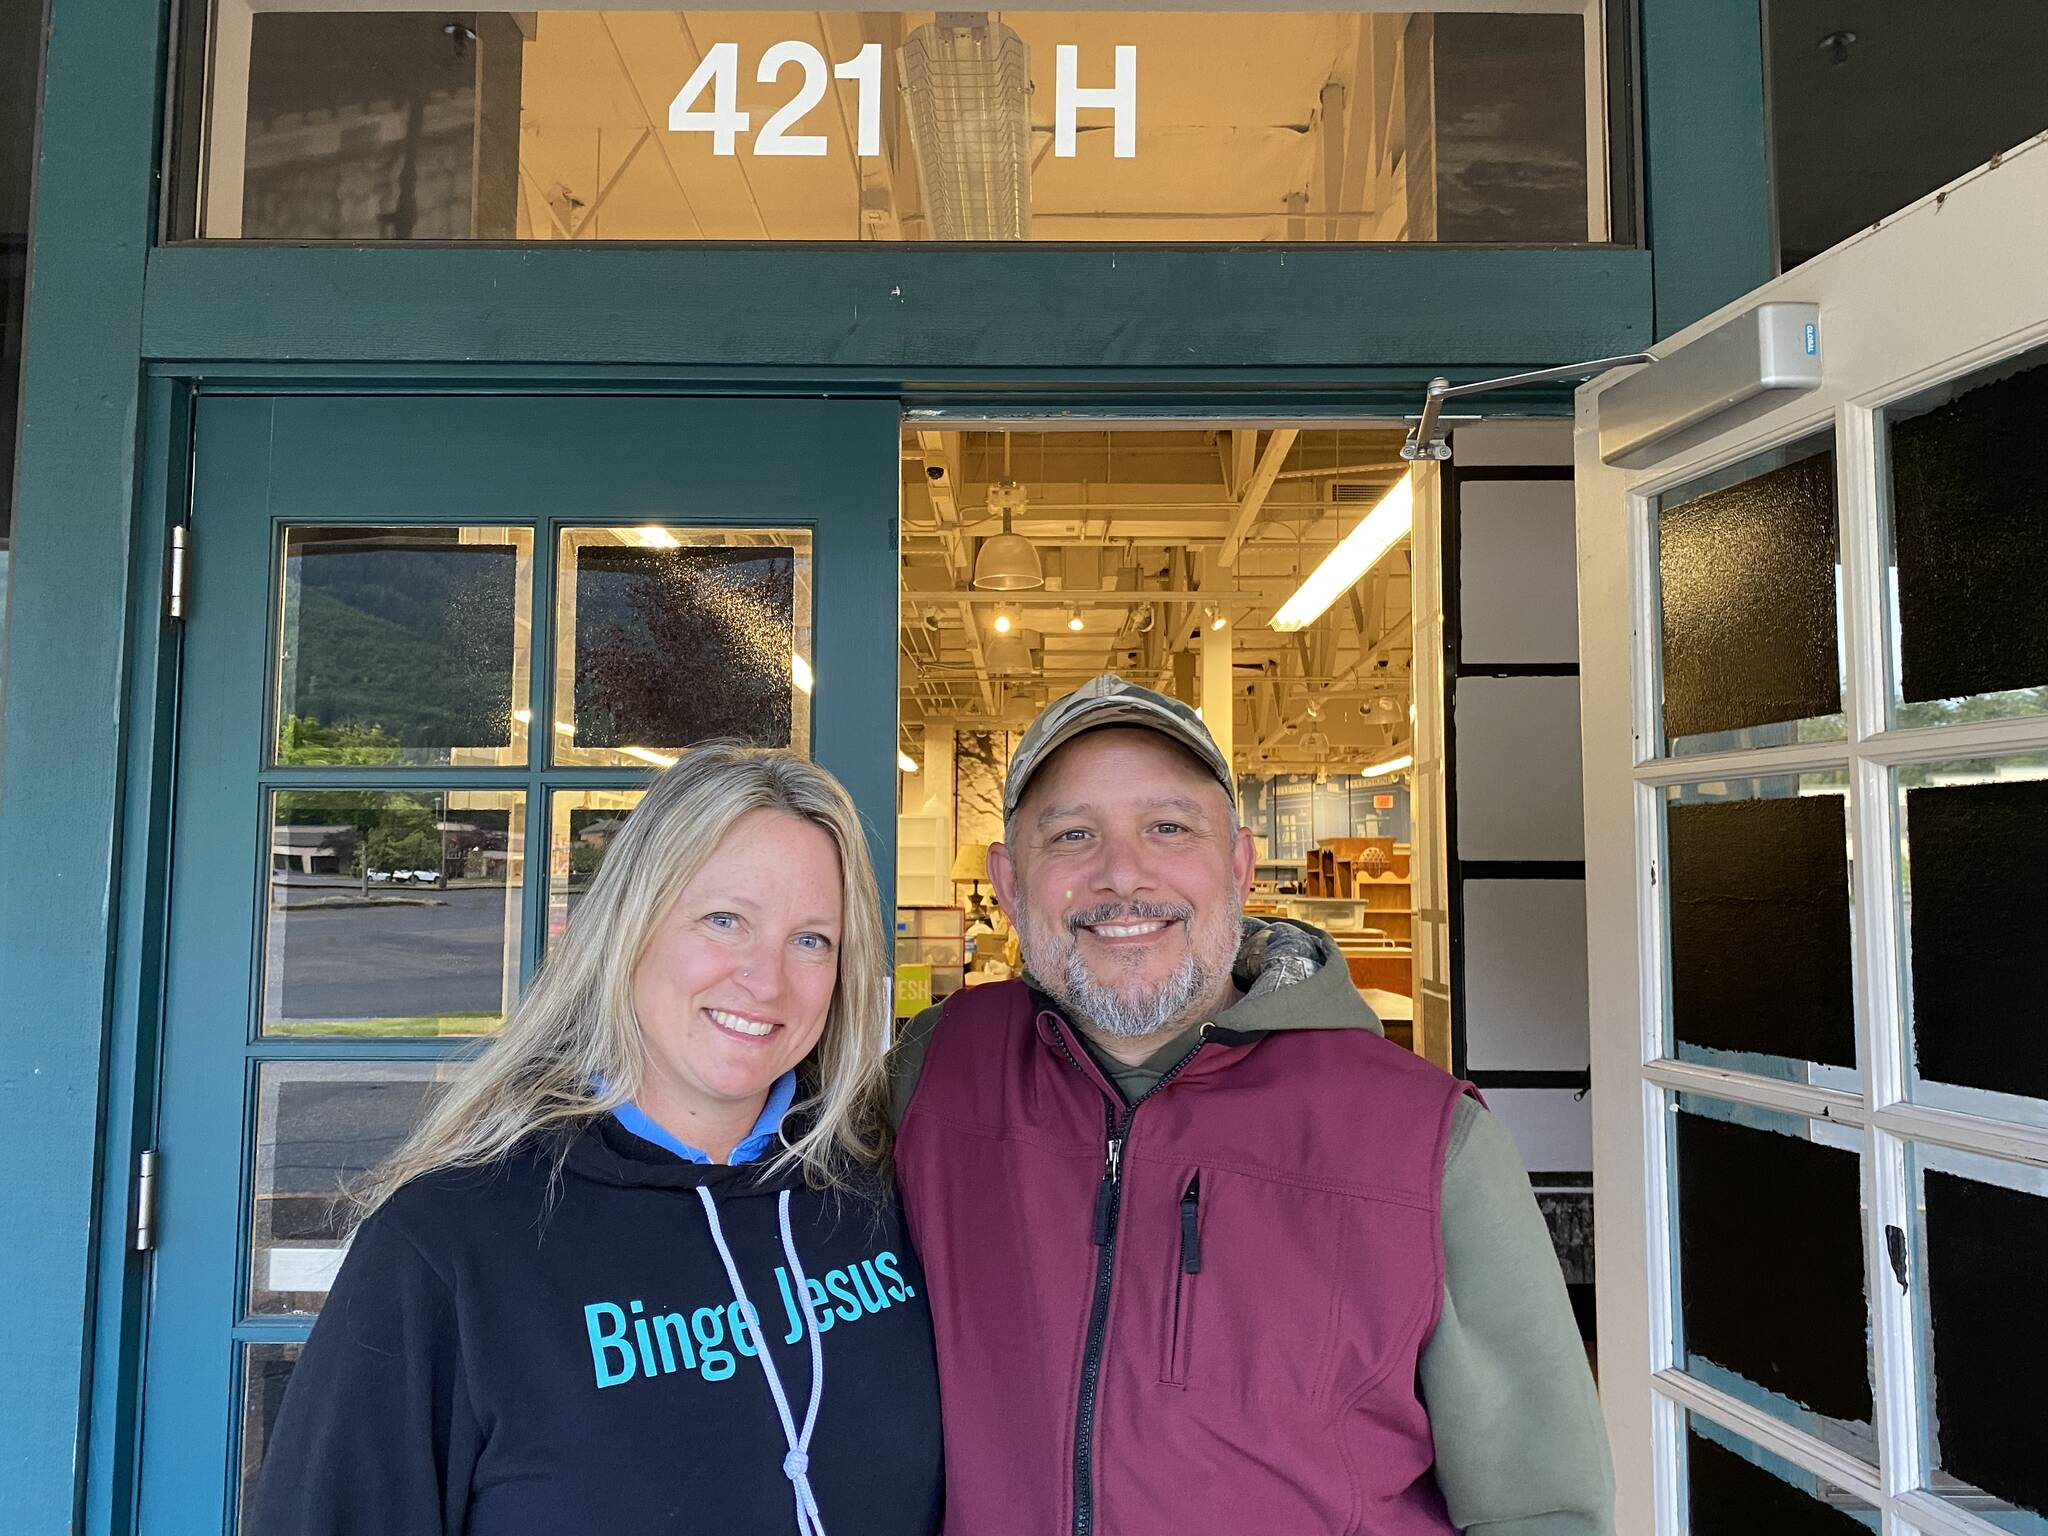 Lena and Don Baunsgard at the new Treasures in Heaven location at the North Bend Outlets. Photo courtesy of Treasures in Heaven